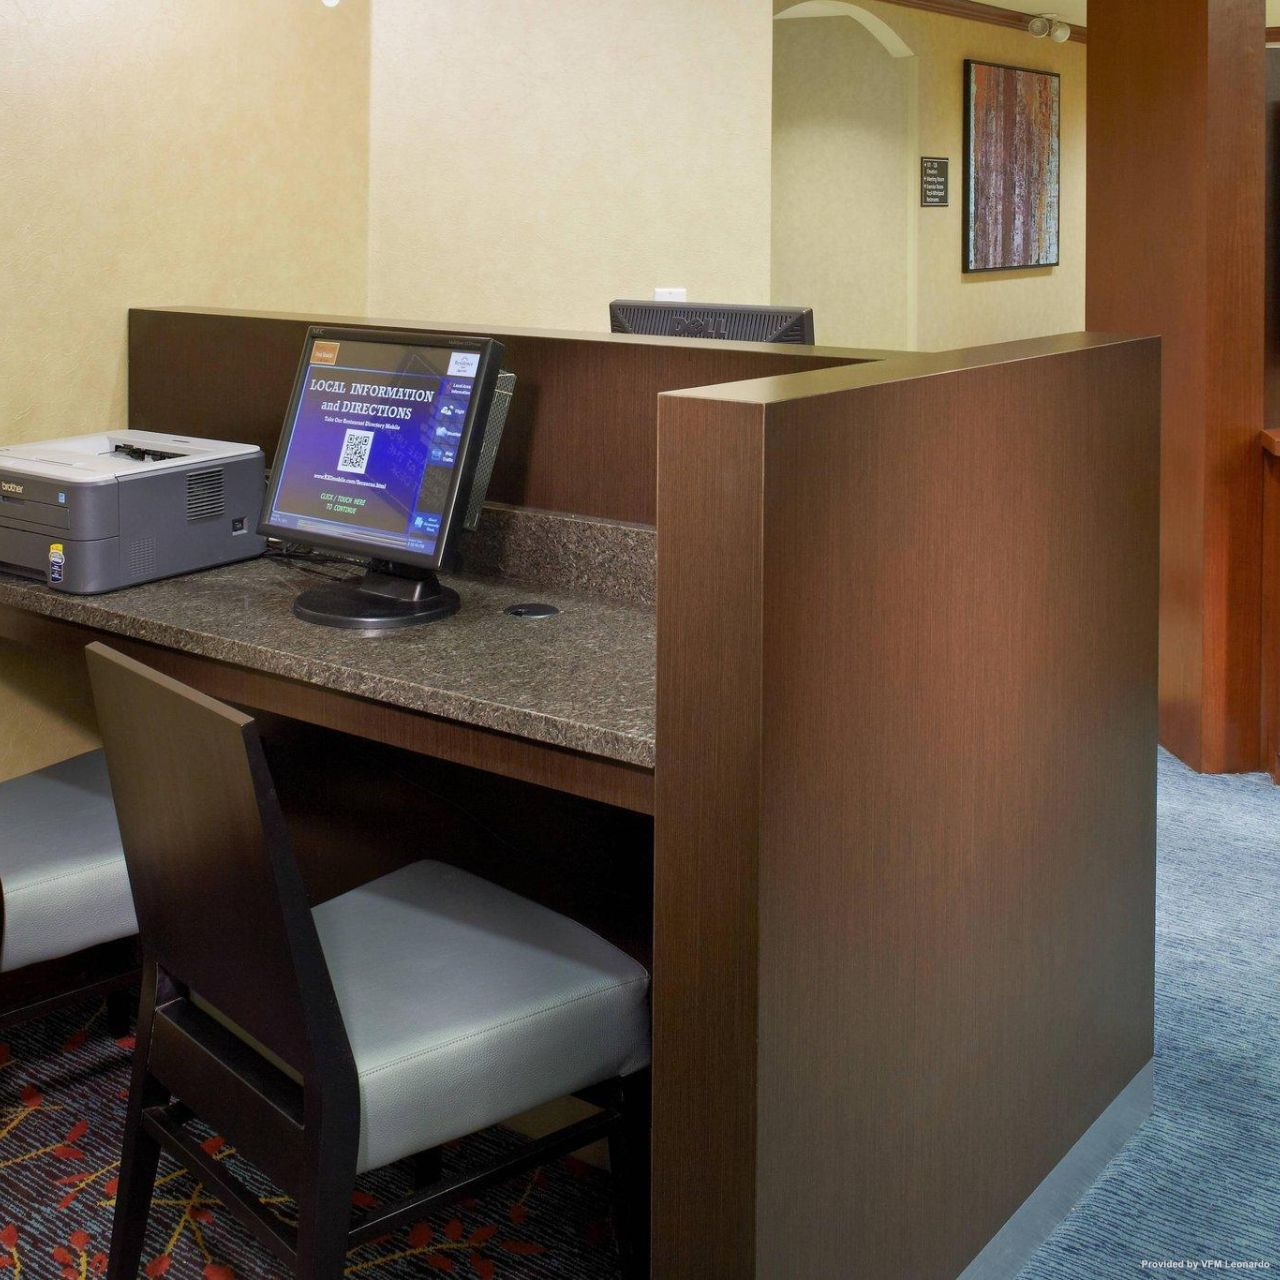 Residence Inn East Rutherford Meadowlands, East Rutherford